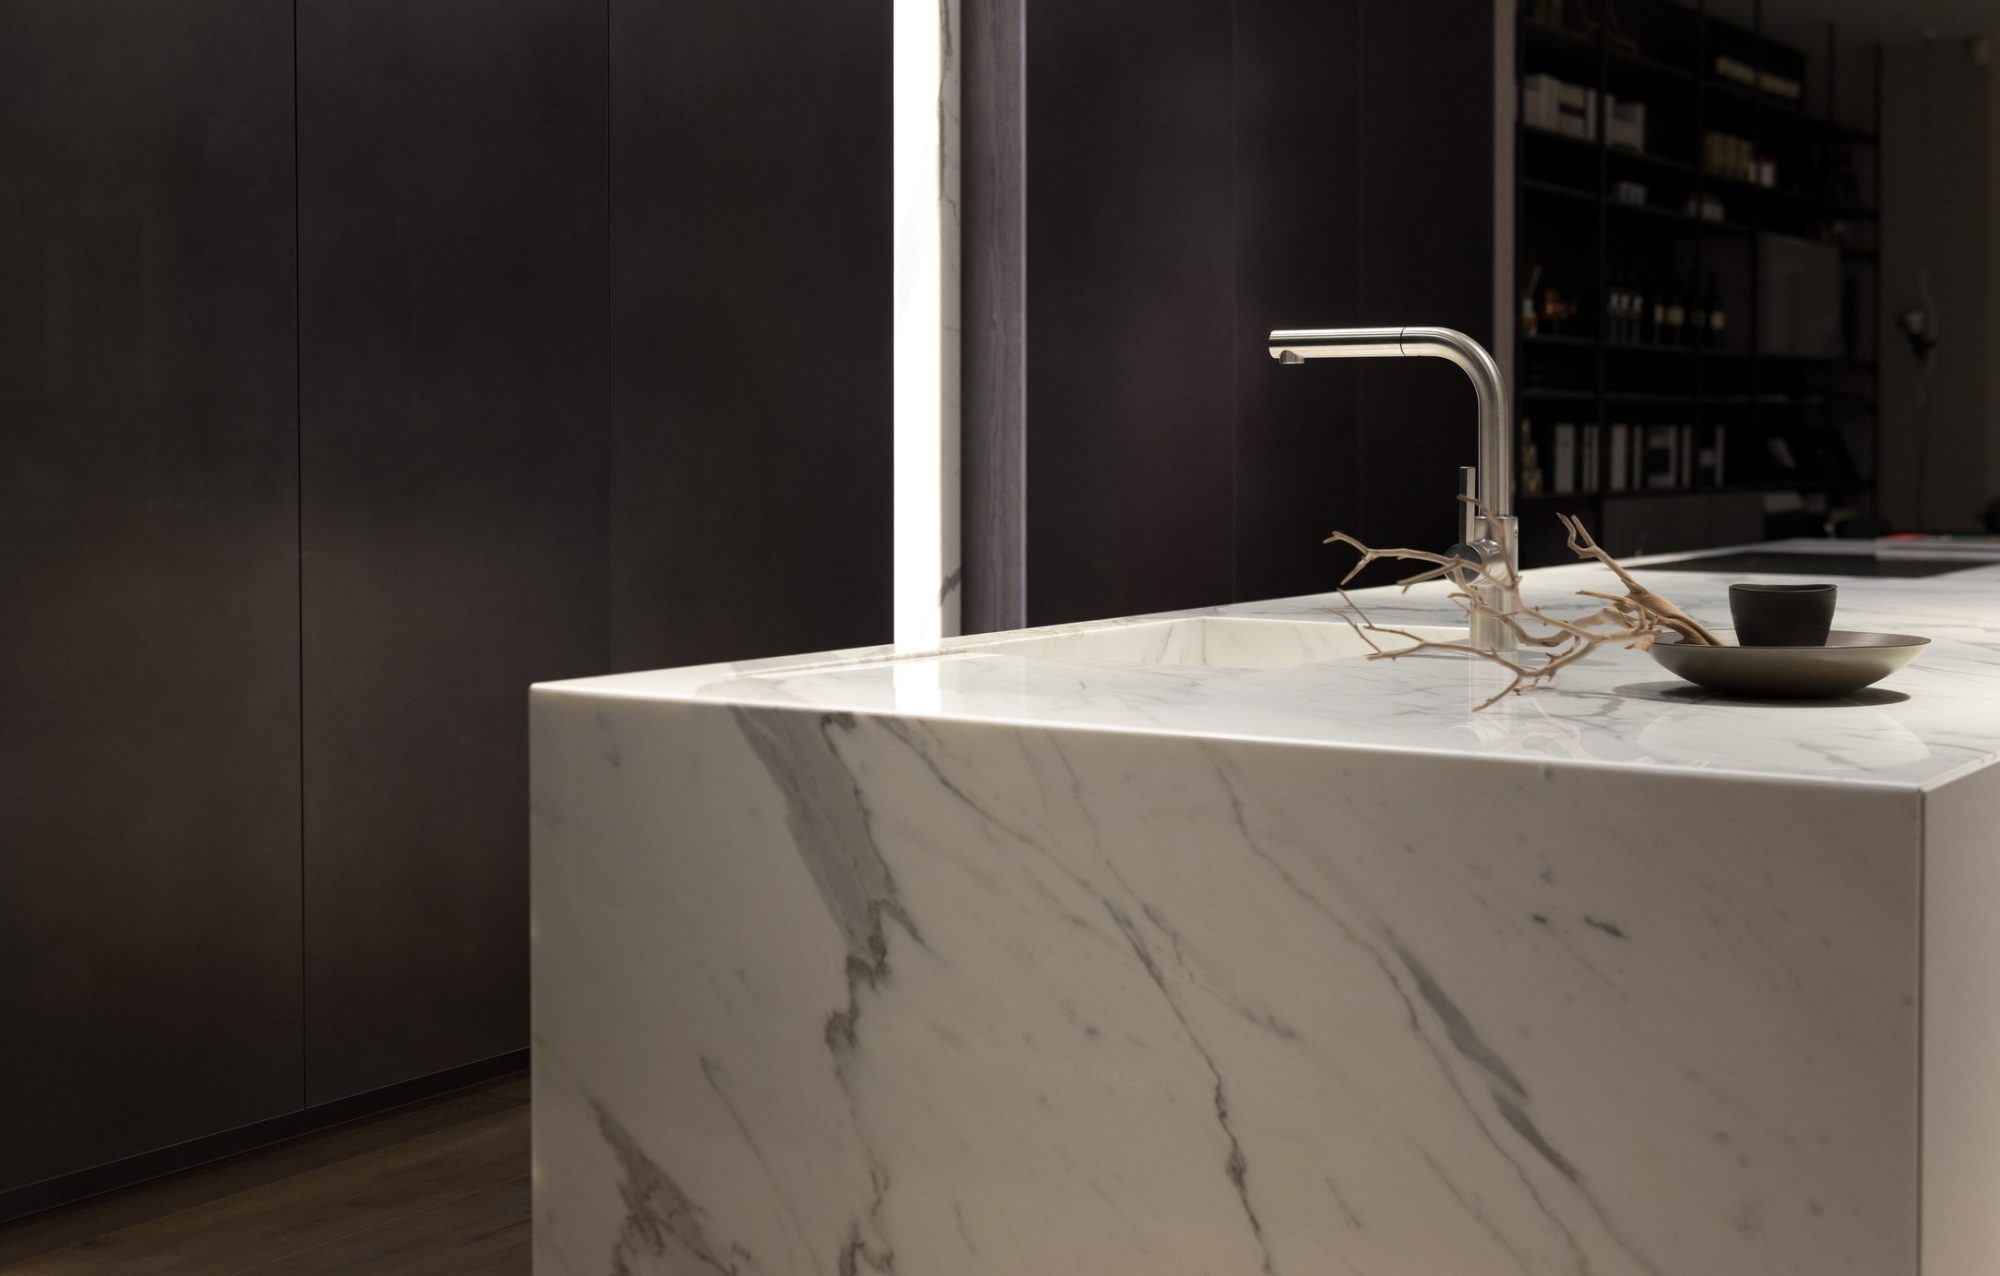 Stylish Solid White Marble Kitchen Counter With Dark Cupboards